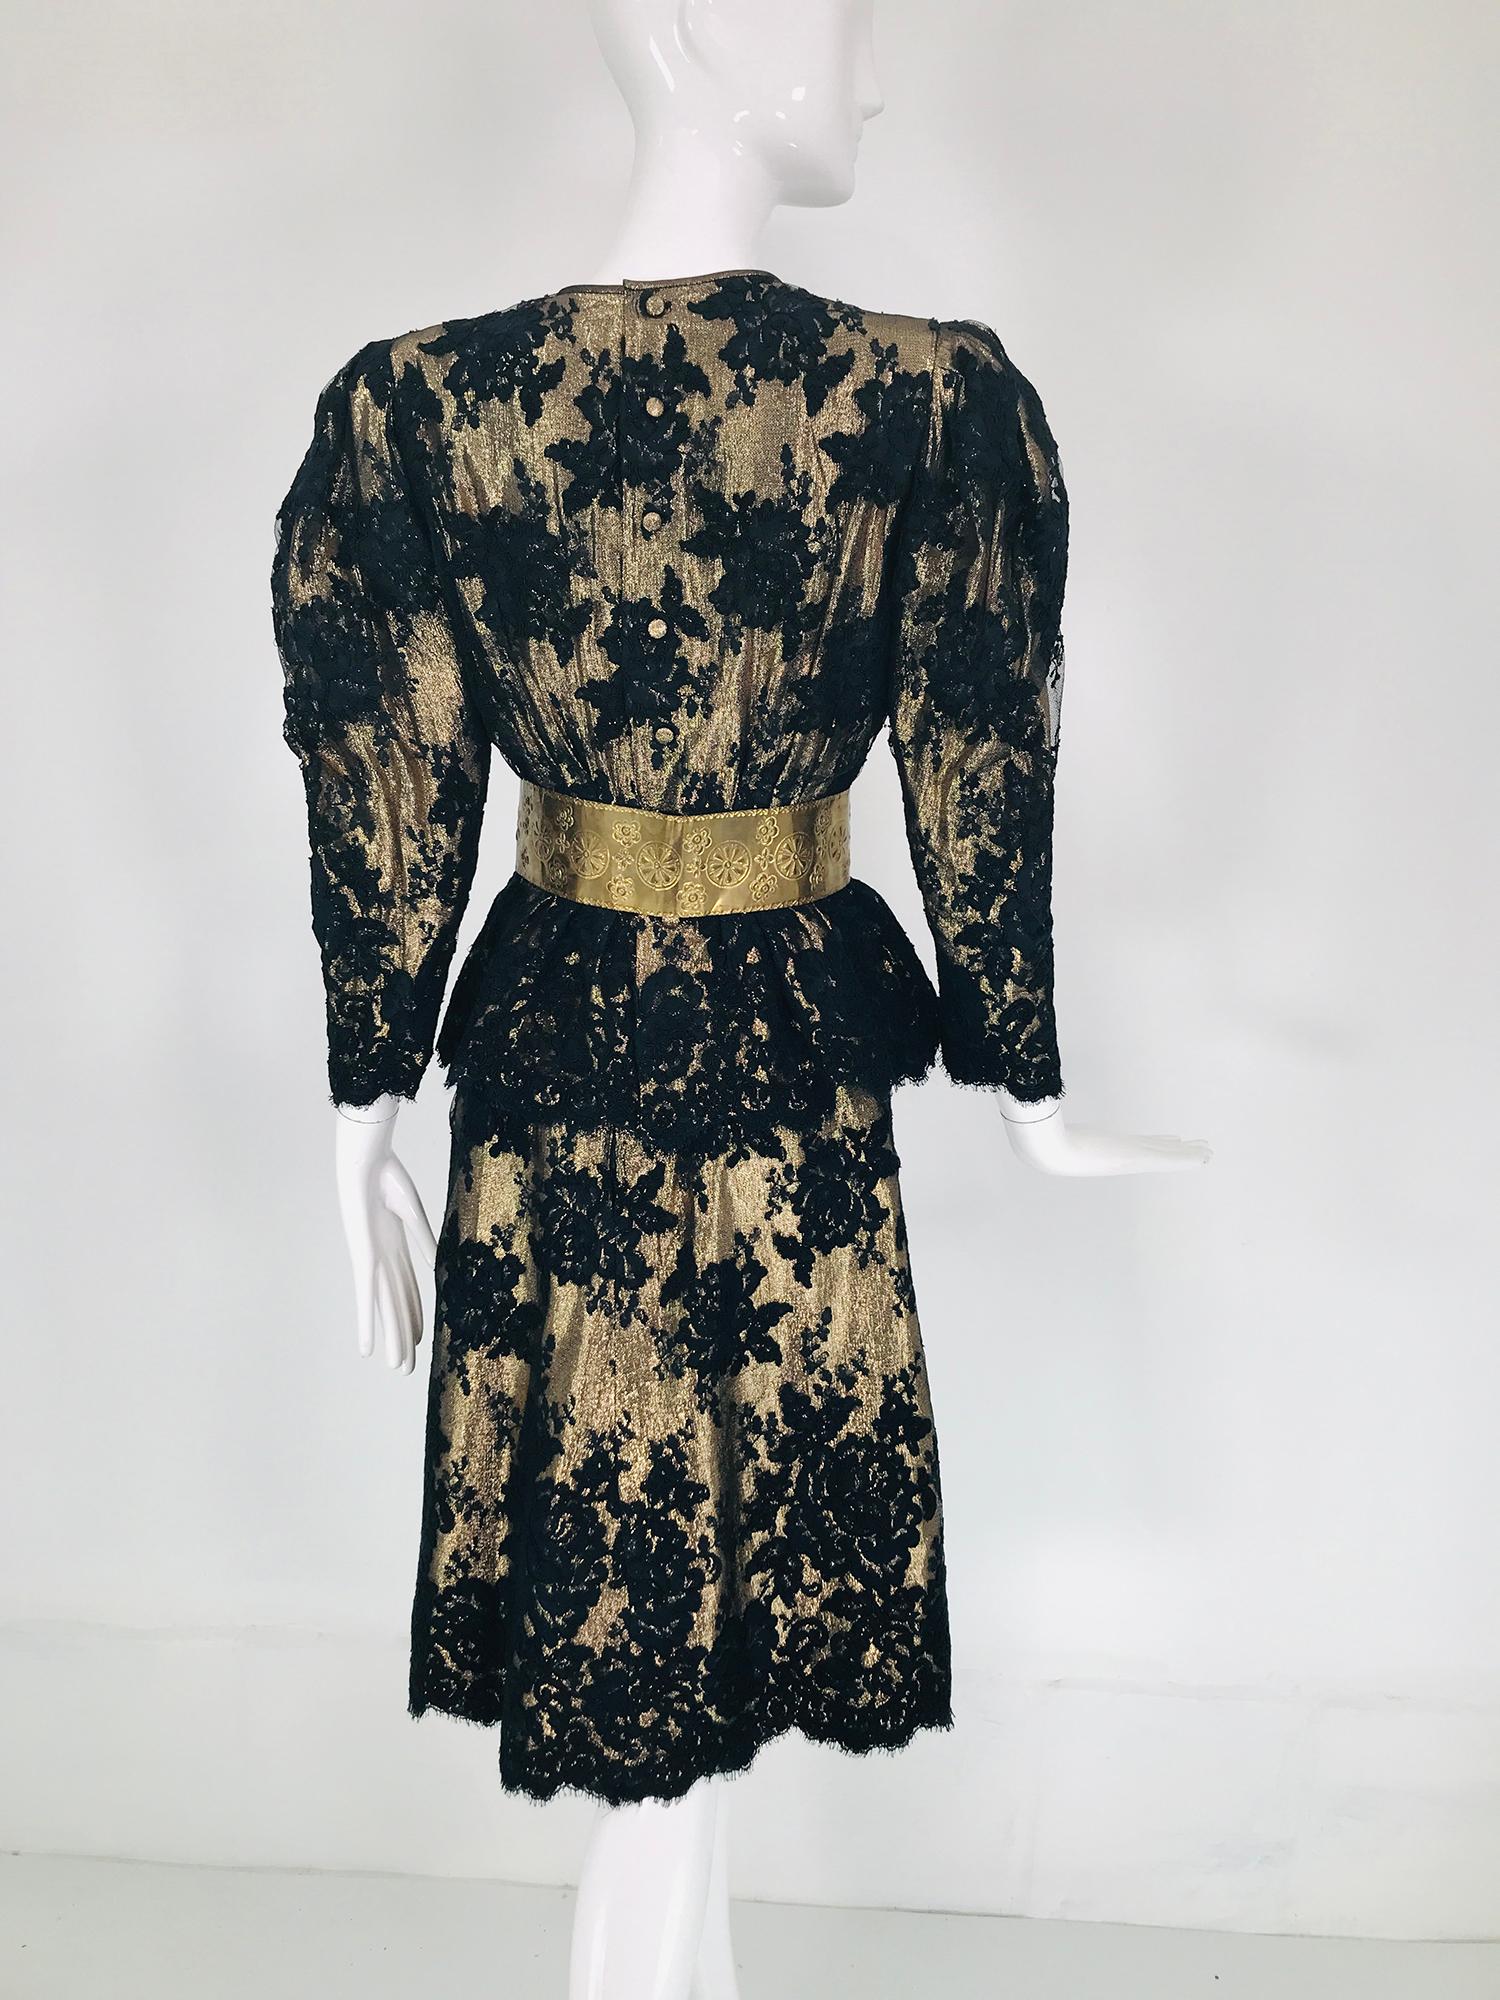 Pauline Trigere Black Guipure Lace over Gold Lame 1980s 2pc Skirt Set  For Sale 1